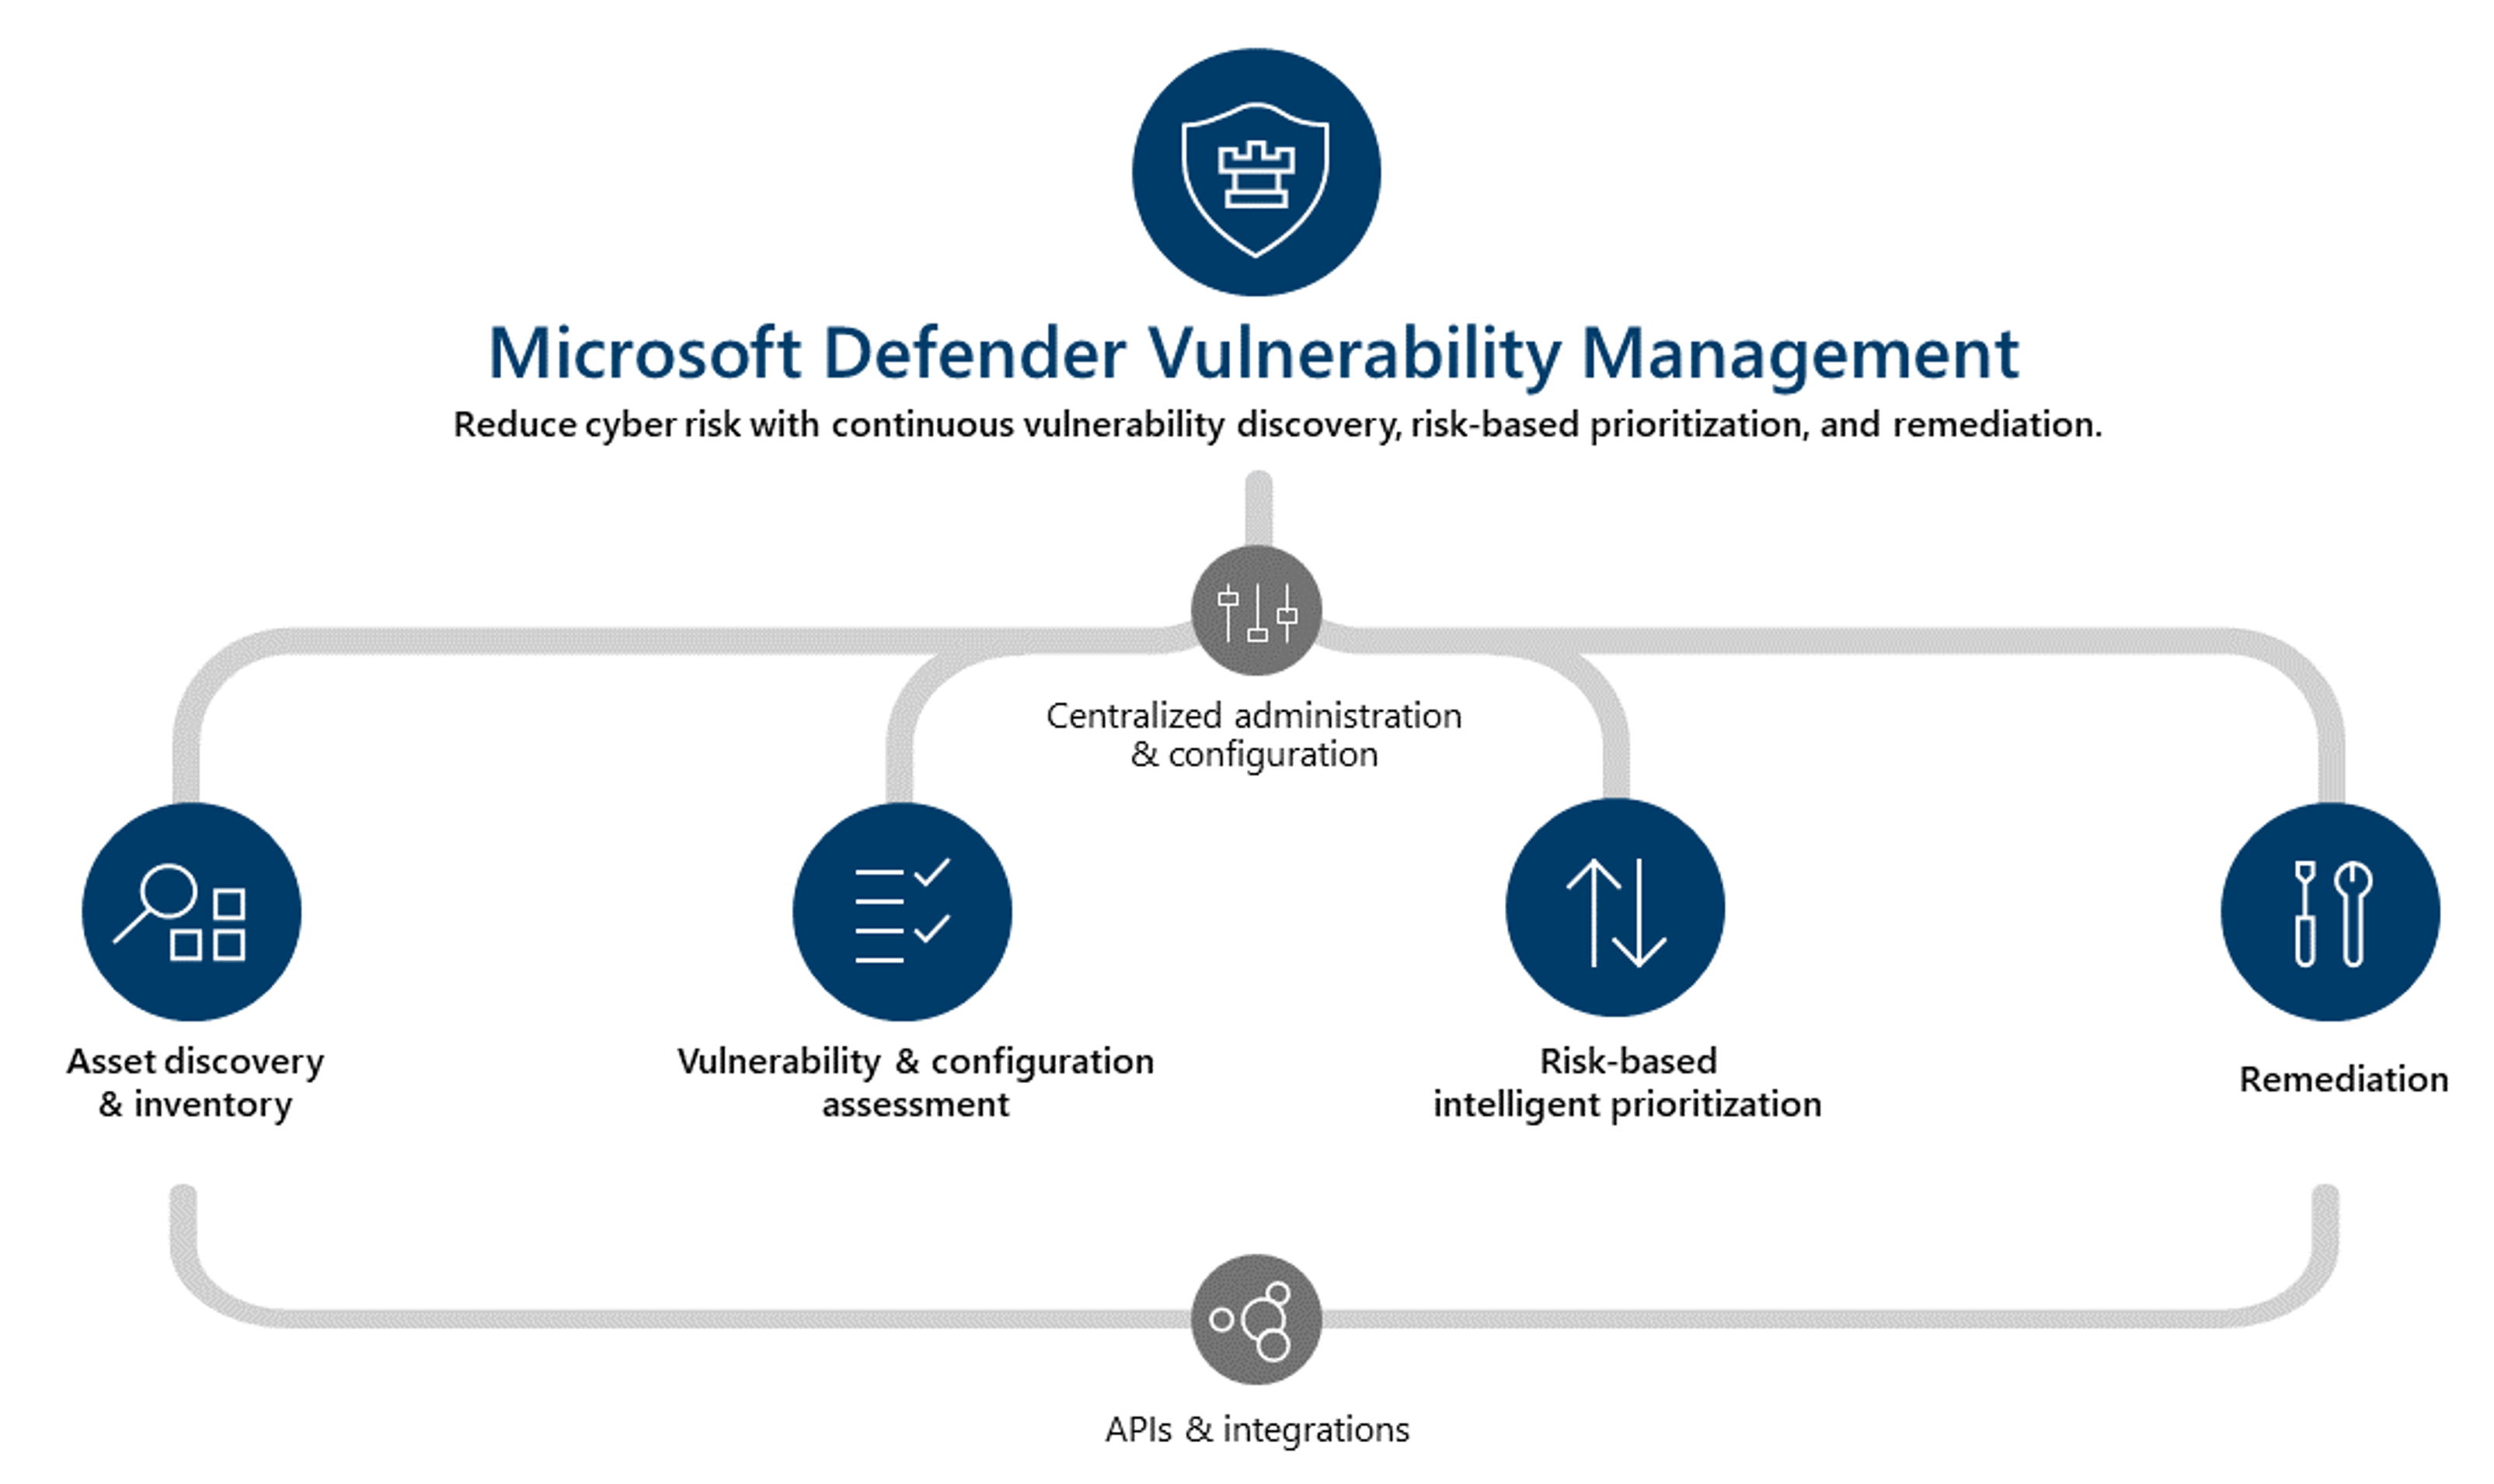 Overview of Microsoft Defender Vulnerability Management.